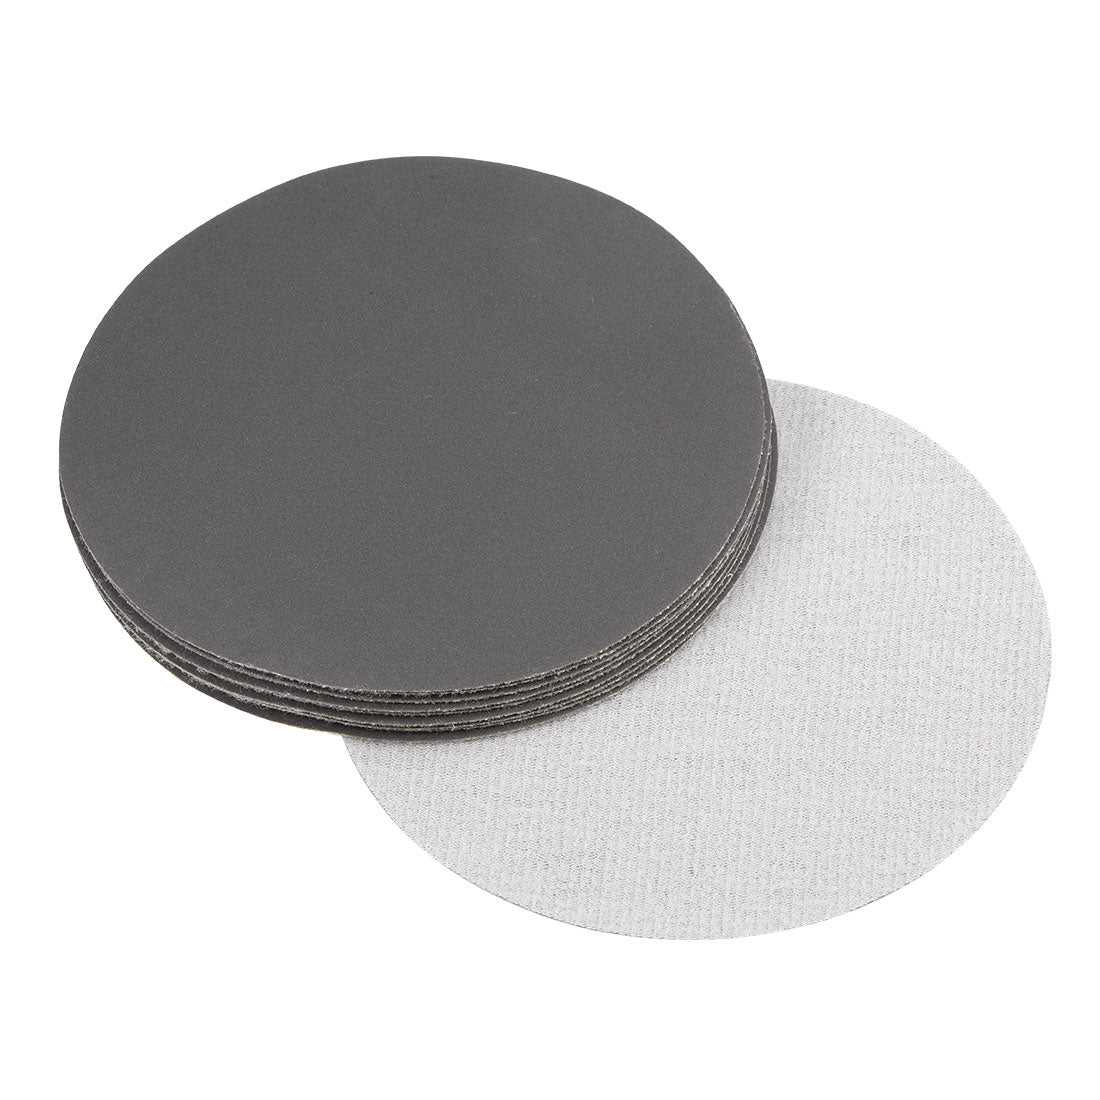 Uxcell Uxcell 5 inch Wet Dry Disc 2500 Grit Hook and Loop Sanding Disc Silicon Carbide 10pcs